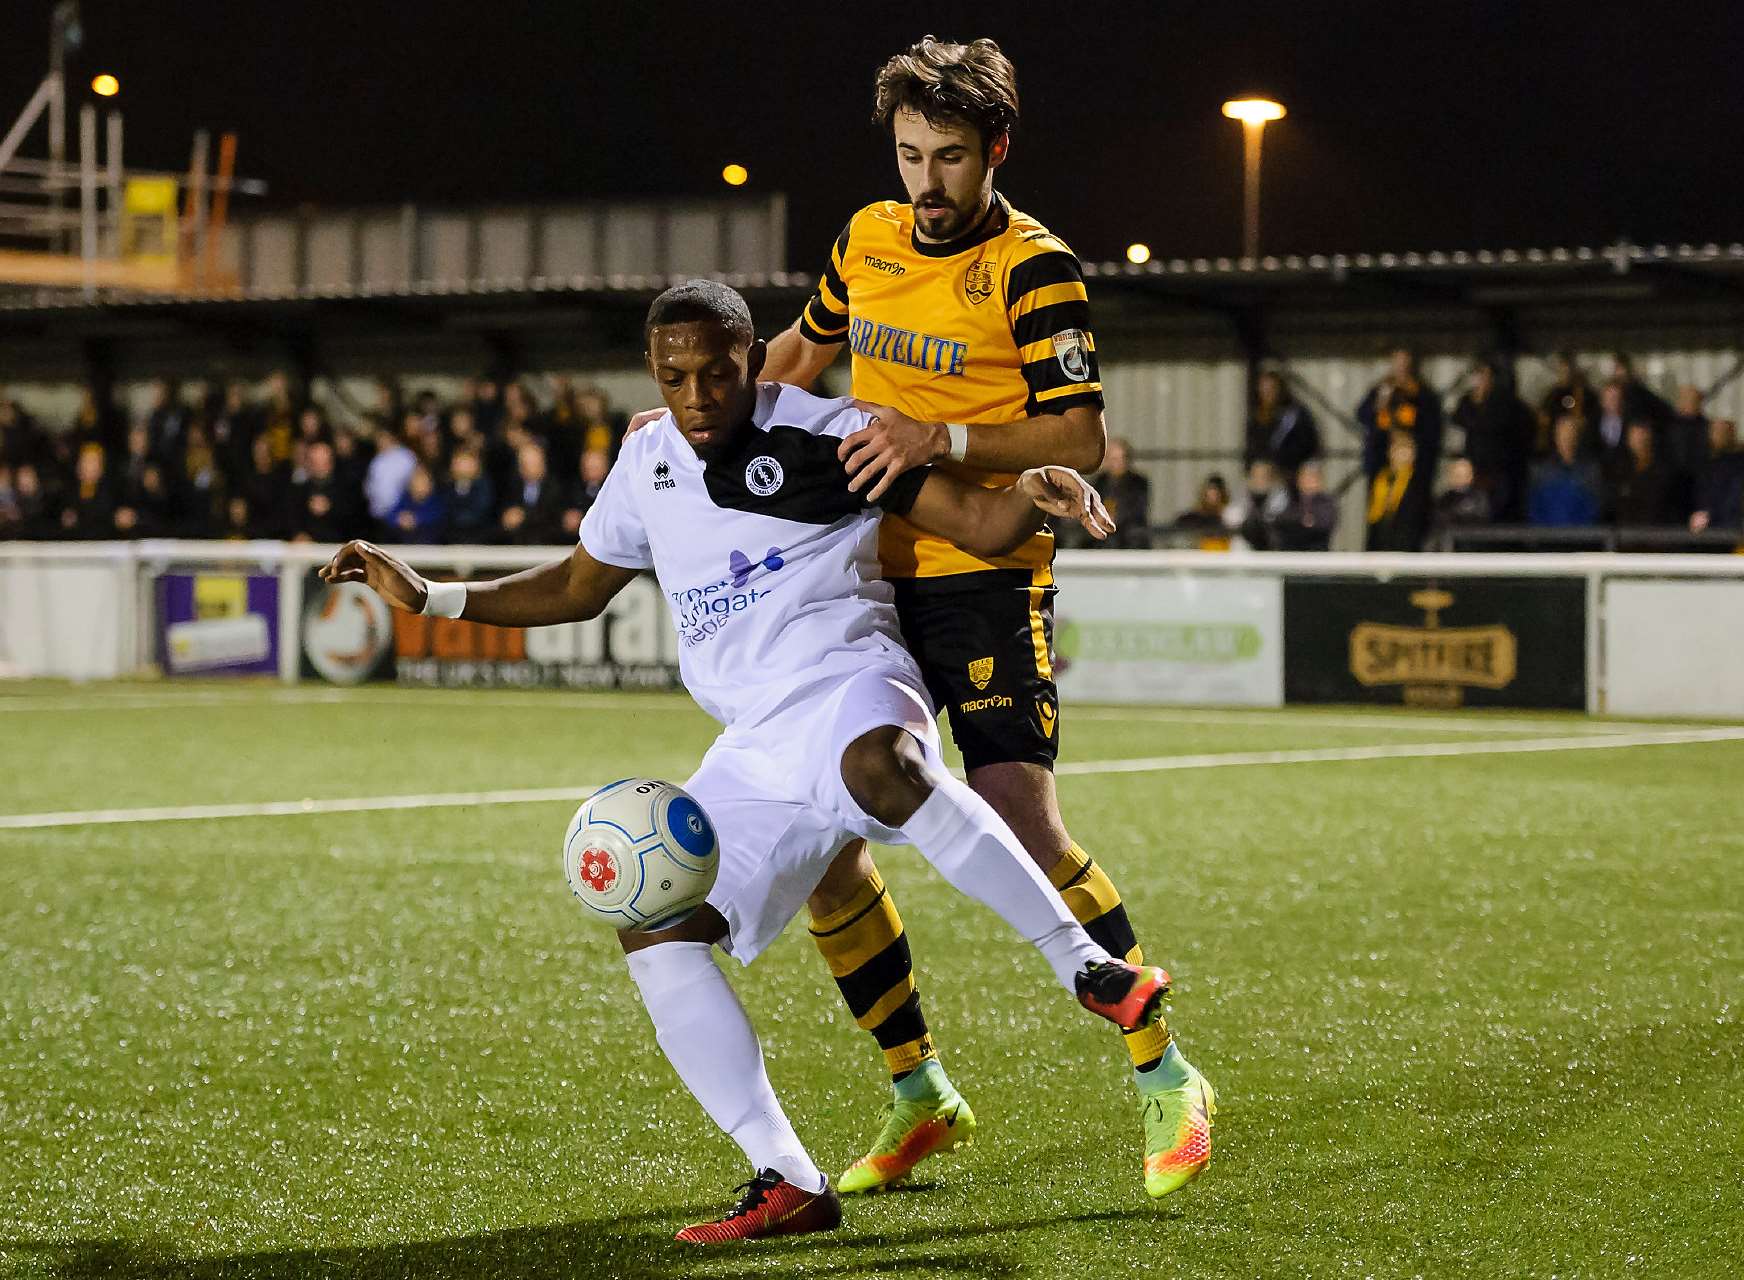 Maidstone full-back Tom Mills looks after his man Picture: Andy Payton